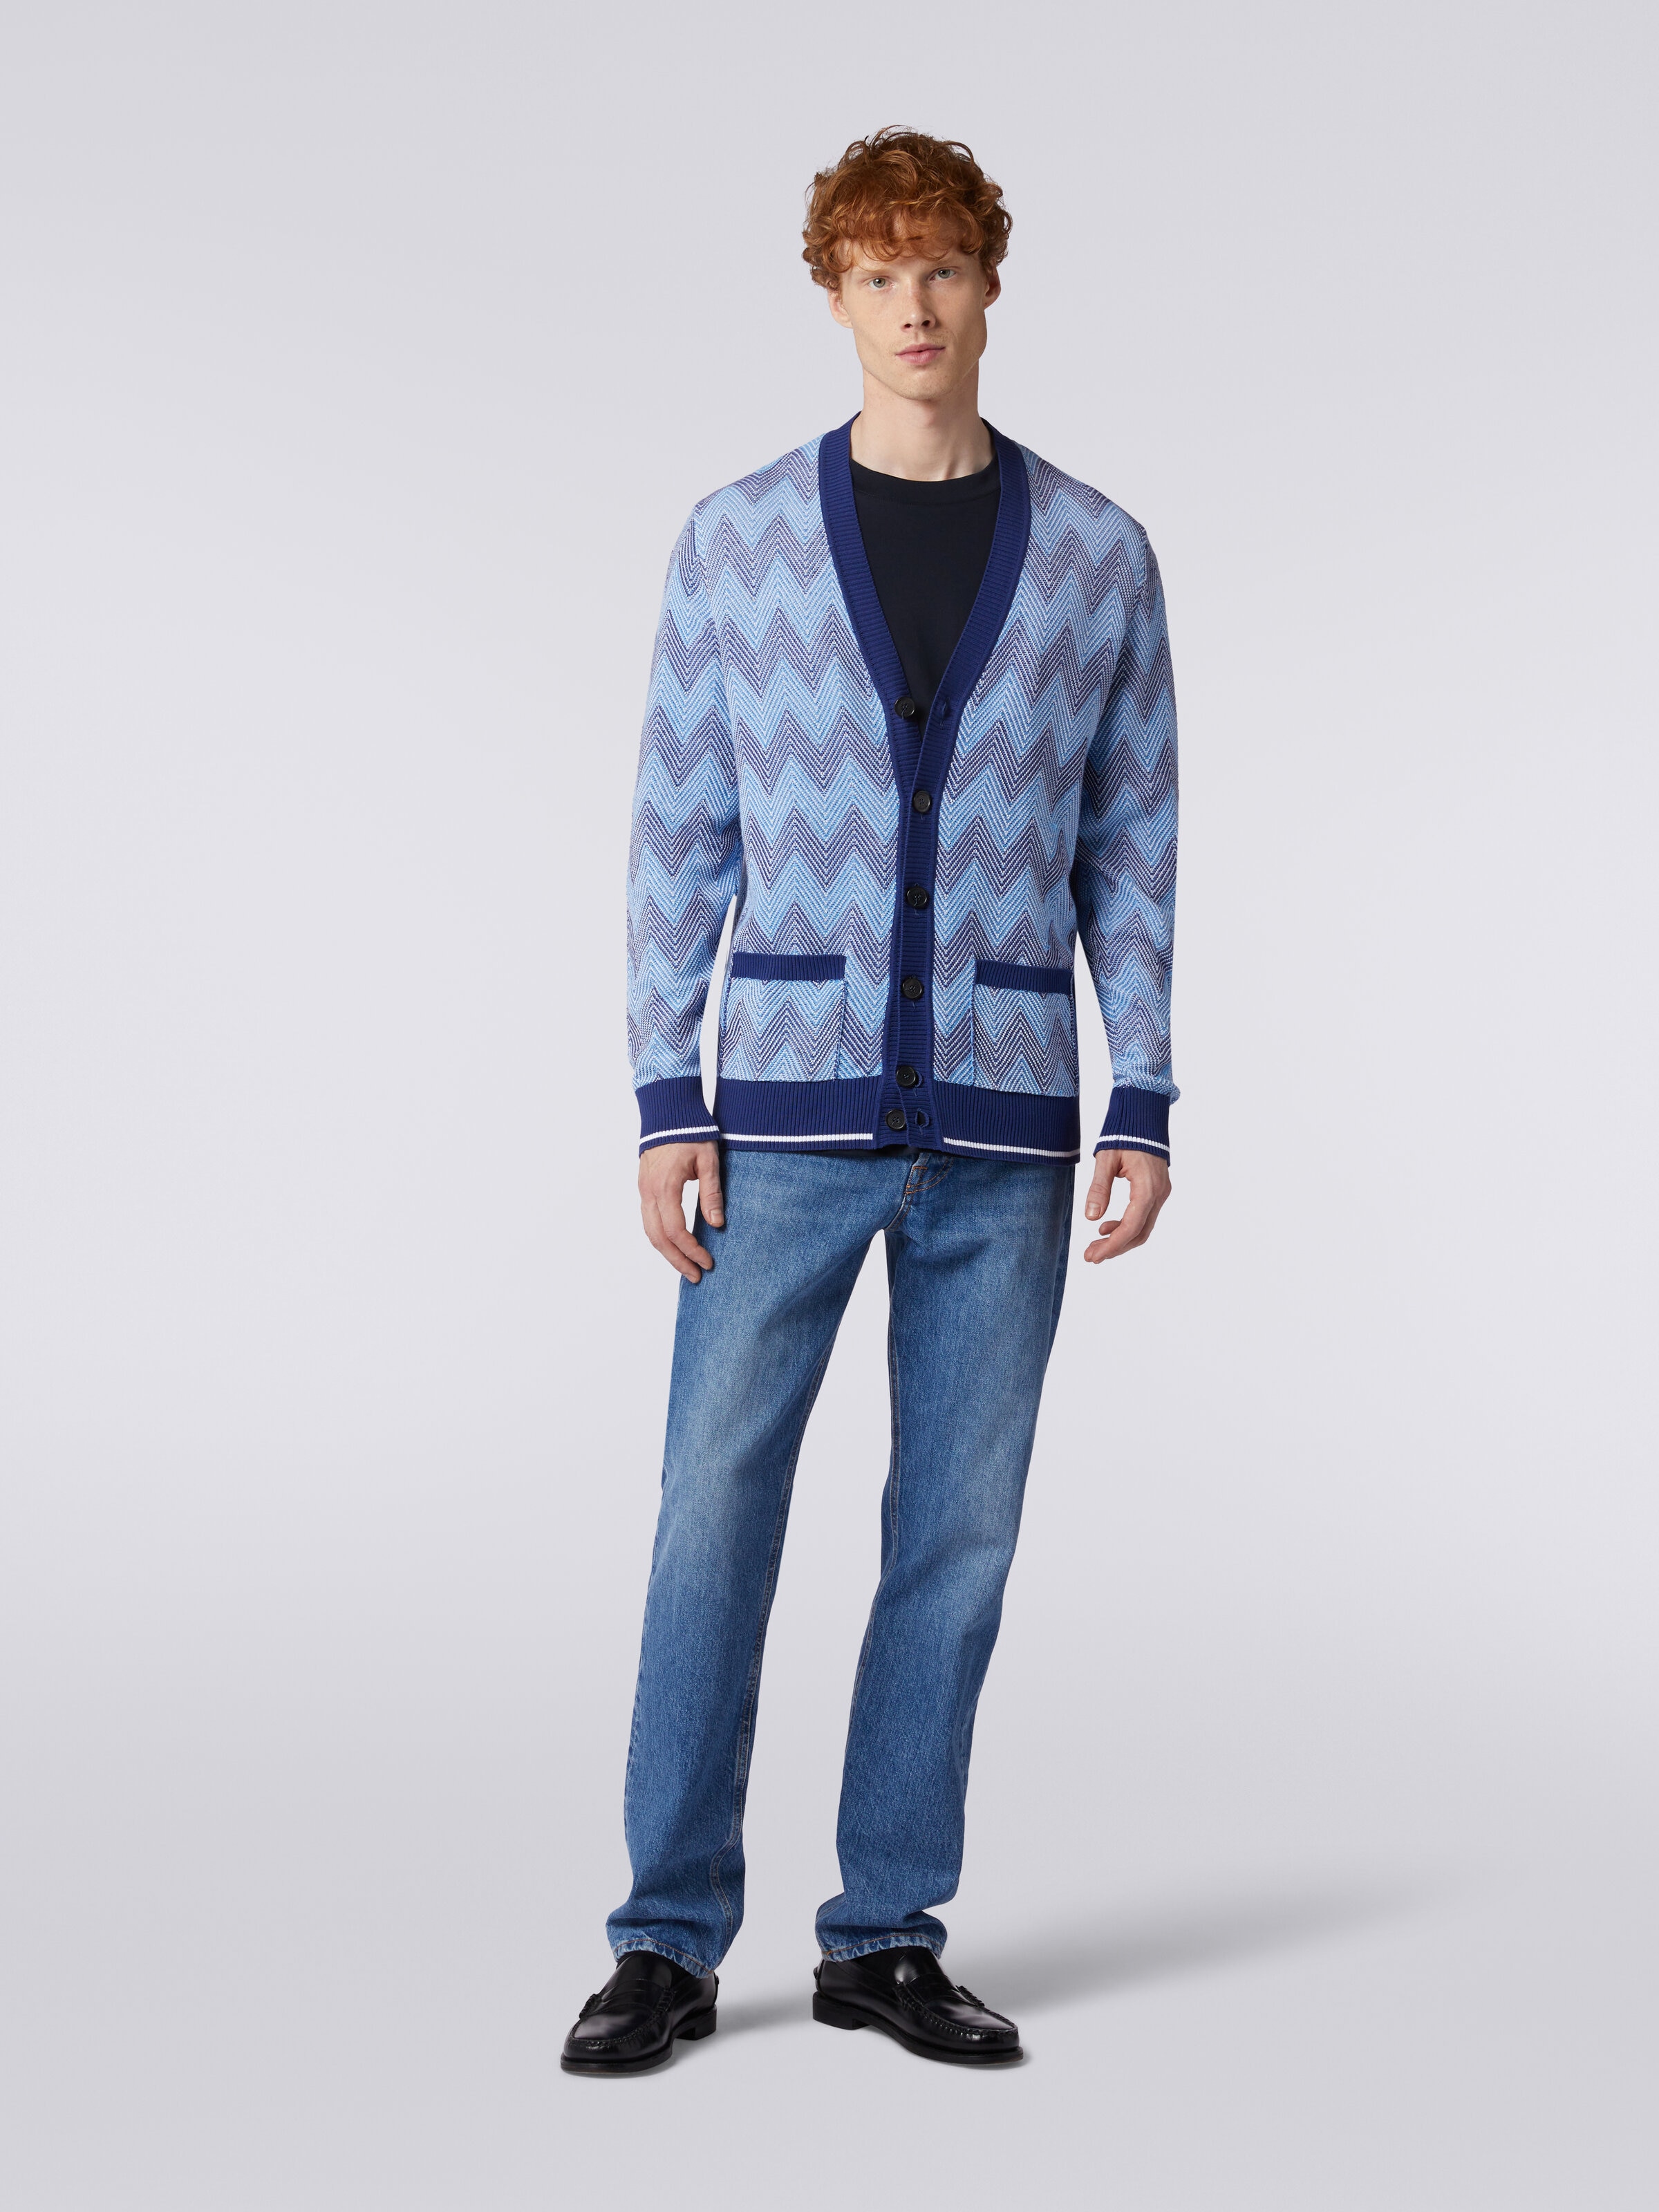 Cardigan in chevron cotton knit with contrasting trim, Blue - 1